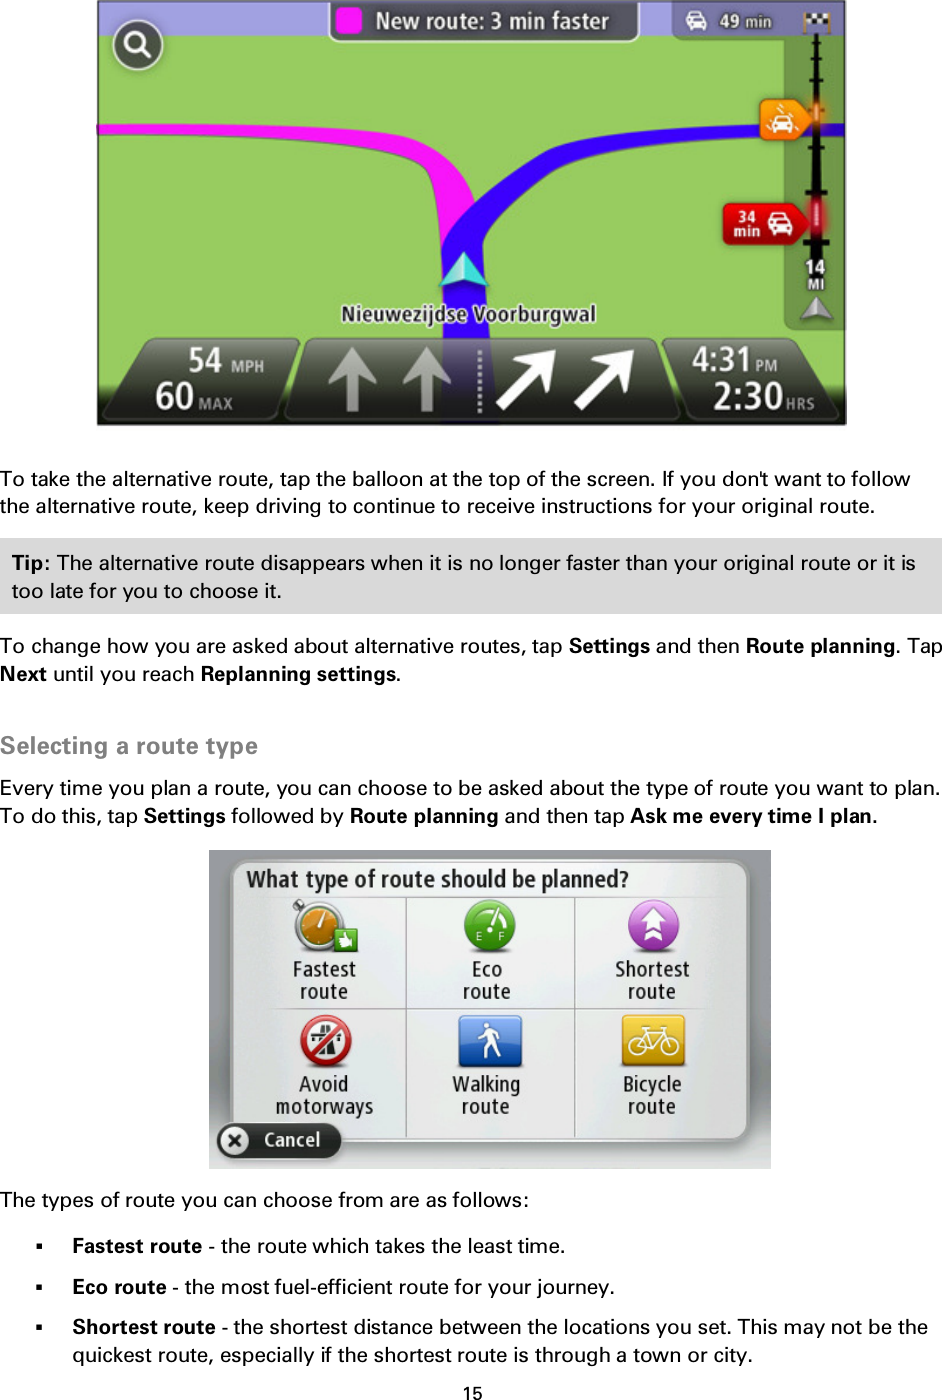 15      To take the alternative route, tap the balloon at the top of the screen. If you don&apos;t want to follow the alternative route, keep driving to continue to receive instructions for your original route. Tip: The alternative route disappears when it is no longer faster than your original route or it is too late for you to choose it.   To change how you are asked about alternative routes, tap Settings and then Route planning. Tap Next until you reach Replanning settings.  Selecting a route type Every time you plan a route, you can choose to be asked about the type of route you want to plan. To do this, tap Settings followed by Route planning and then tap Ask me every time I plan.  The types of route you can choose from are as follows:  Fastest route - the route which takes the least time.  Eco route - the most fuel-efficient route for your journey.  Shortest route - the shortest distance between the locations you set. This may not be the quickest route, especially if the shortest route is through a town or city. 